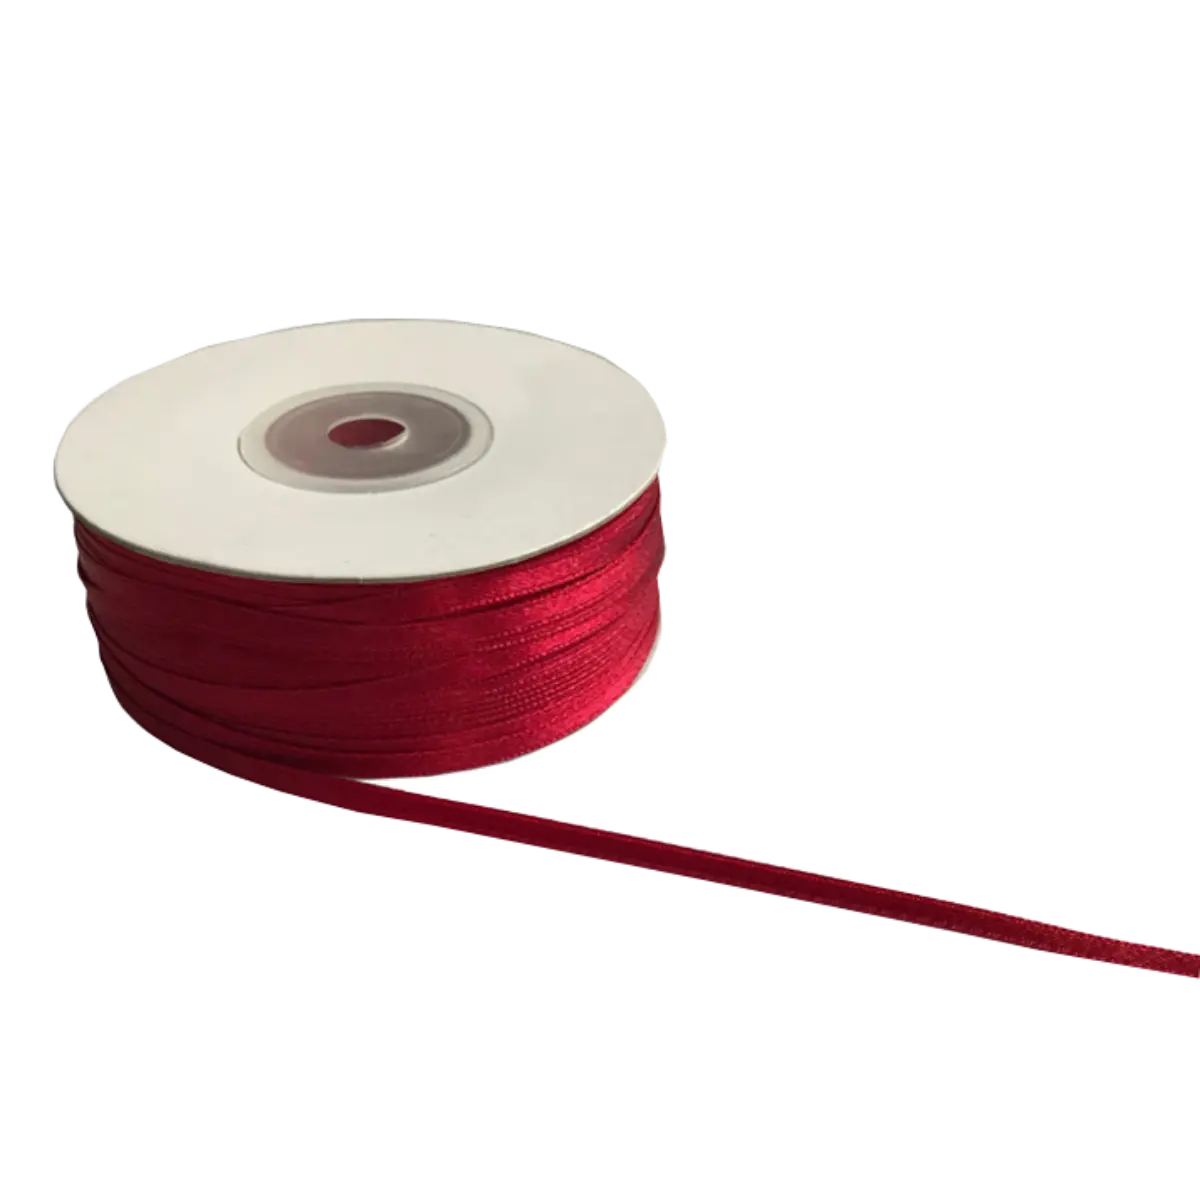 Claret Red Double Sided Satin Ribbons - 3mm Wide By 100mts